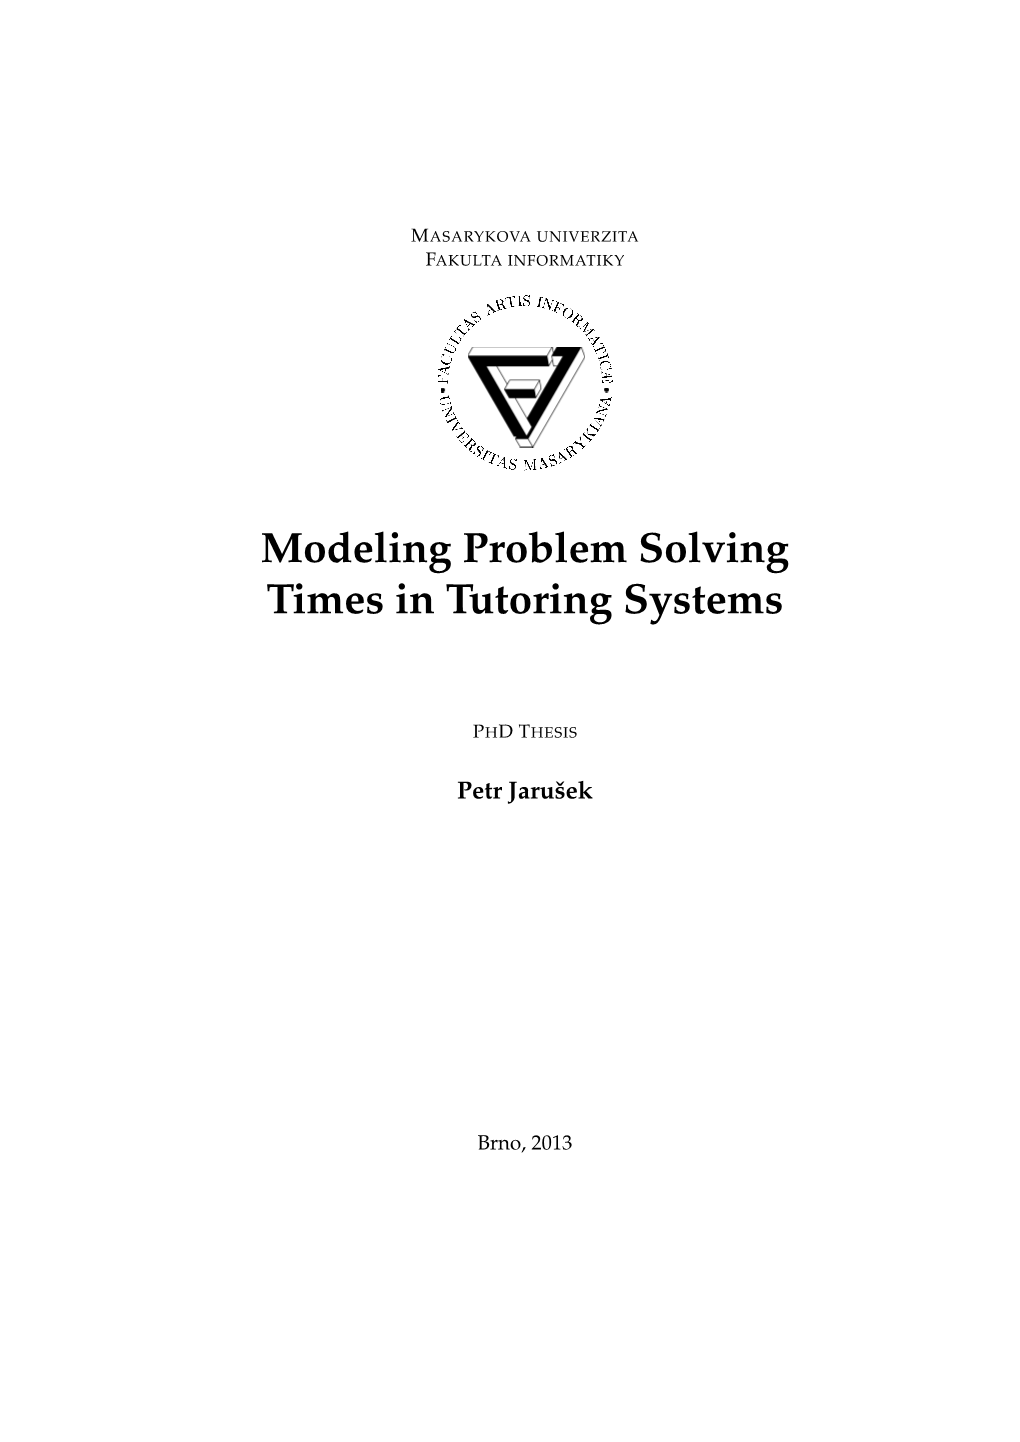 Modeling Problem Solving Times in Tutoring Systems